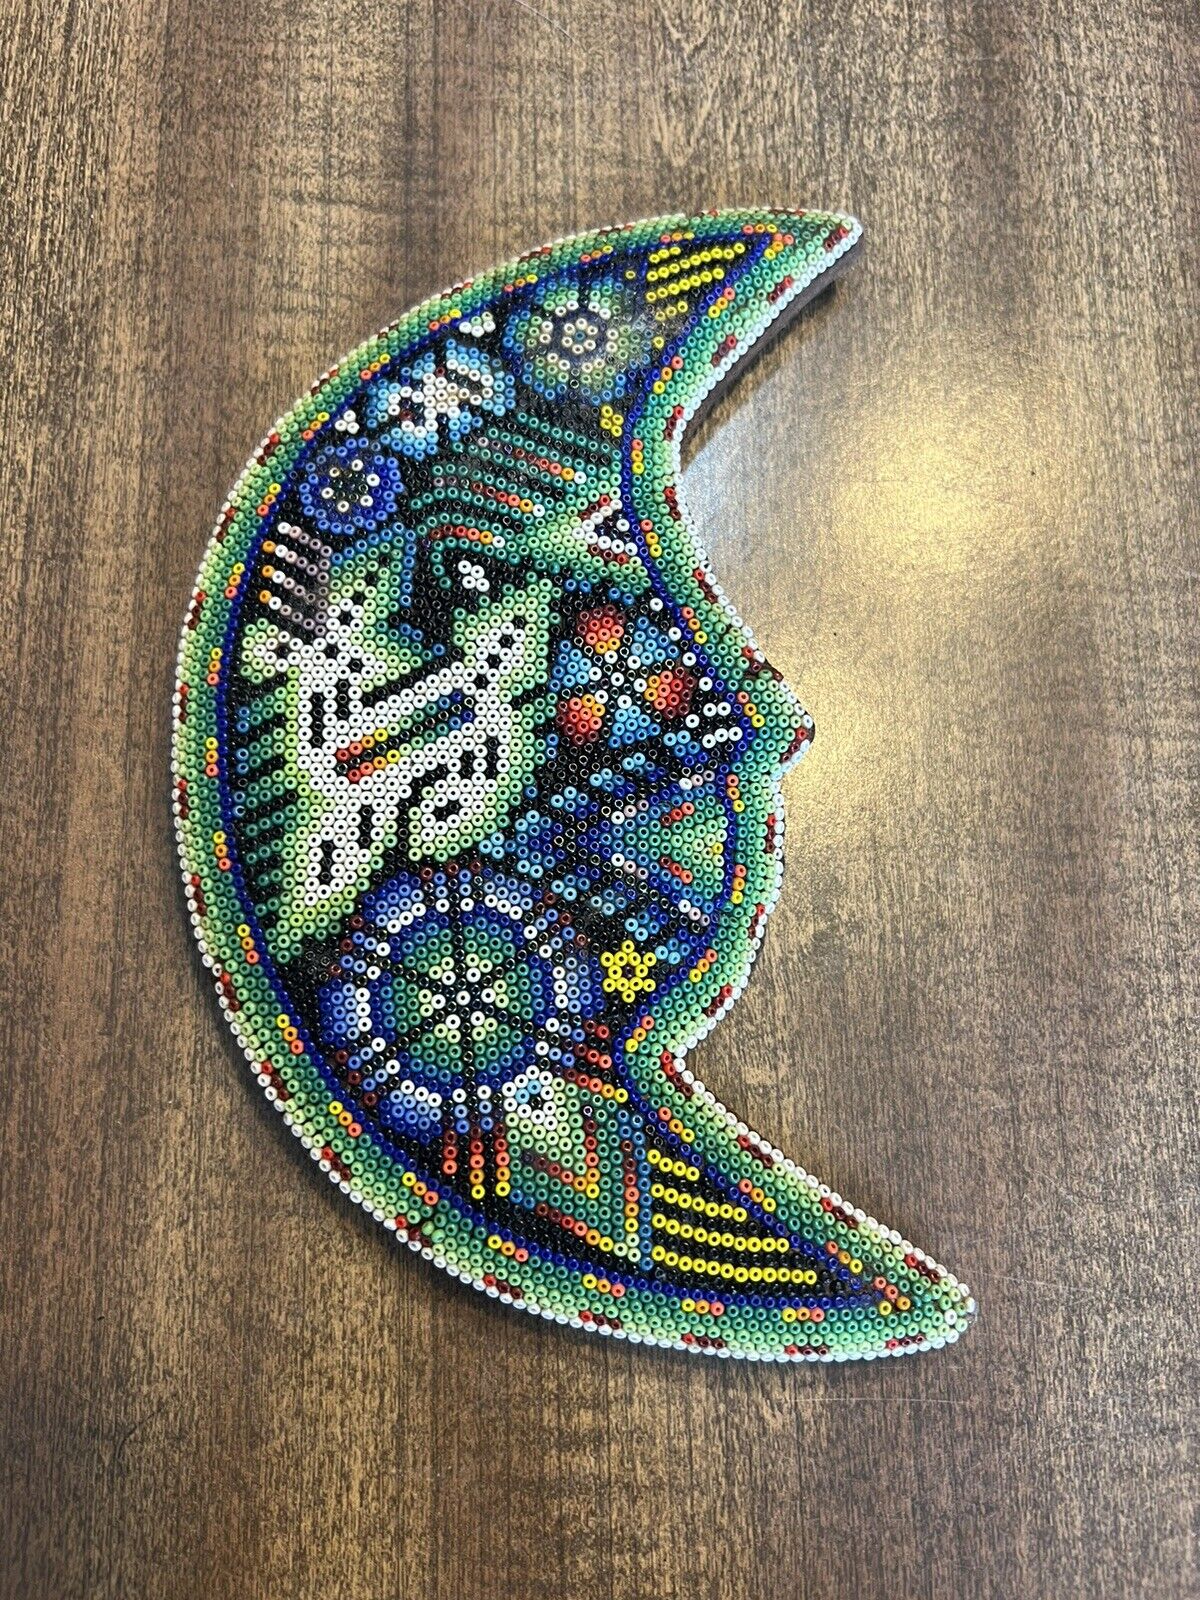 An Unusual and Attractive Huichol Beaded Moon Wall Plaque 8.75”